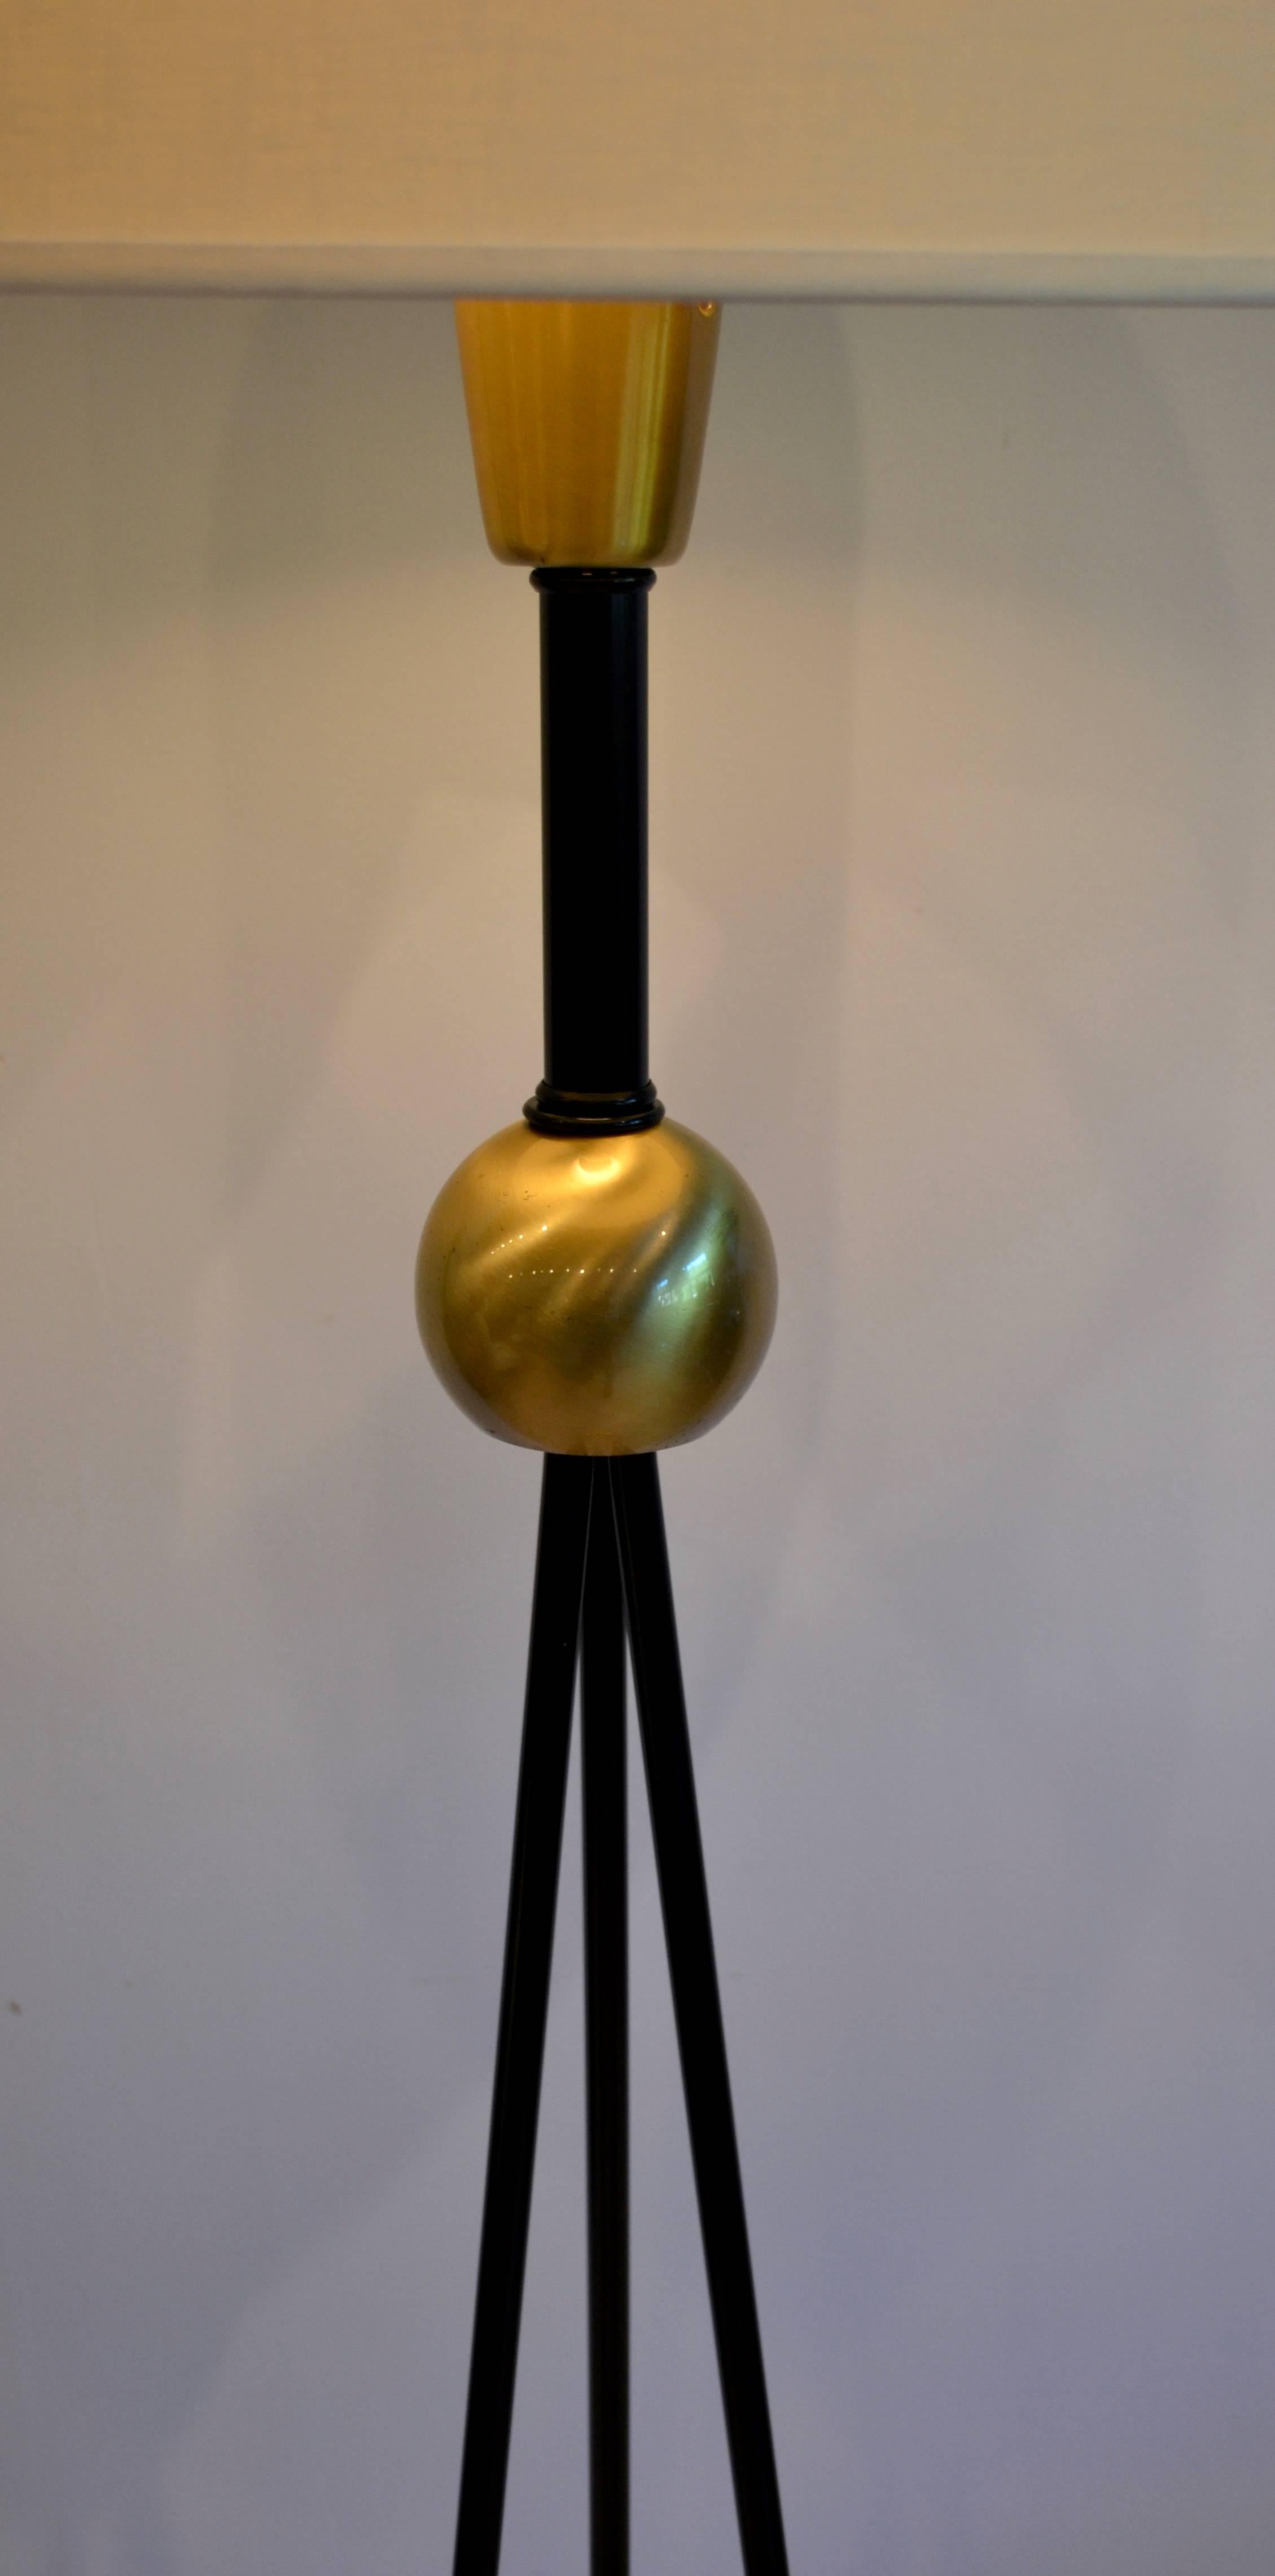 Classic Mid-Century Modern brass and iron floor lamp by Gerald Thurston for Lightolier. Circular base and sphere joinery detailing with black metal tripod base. Rewired and ready to go!